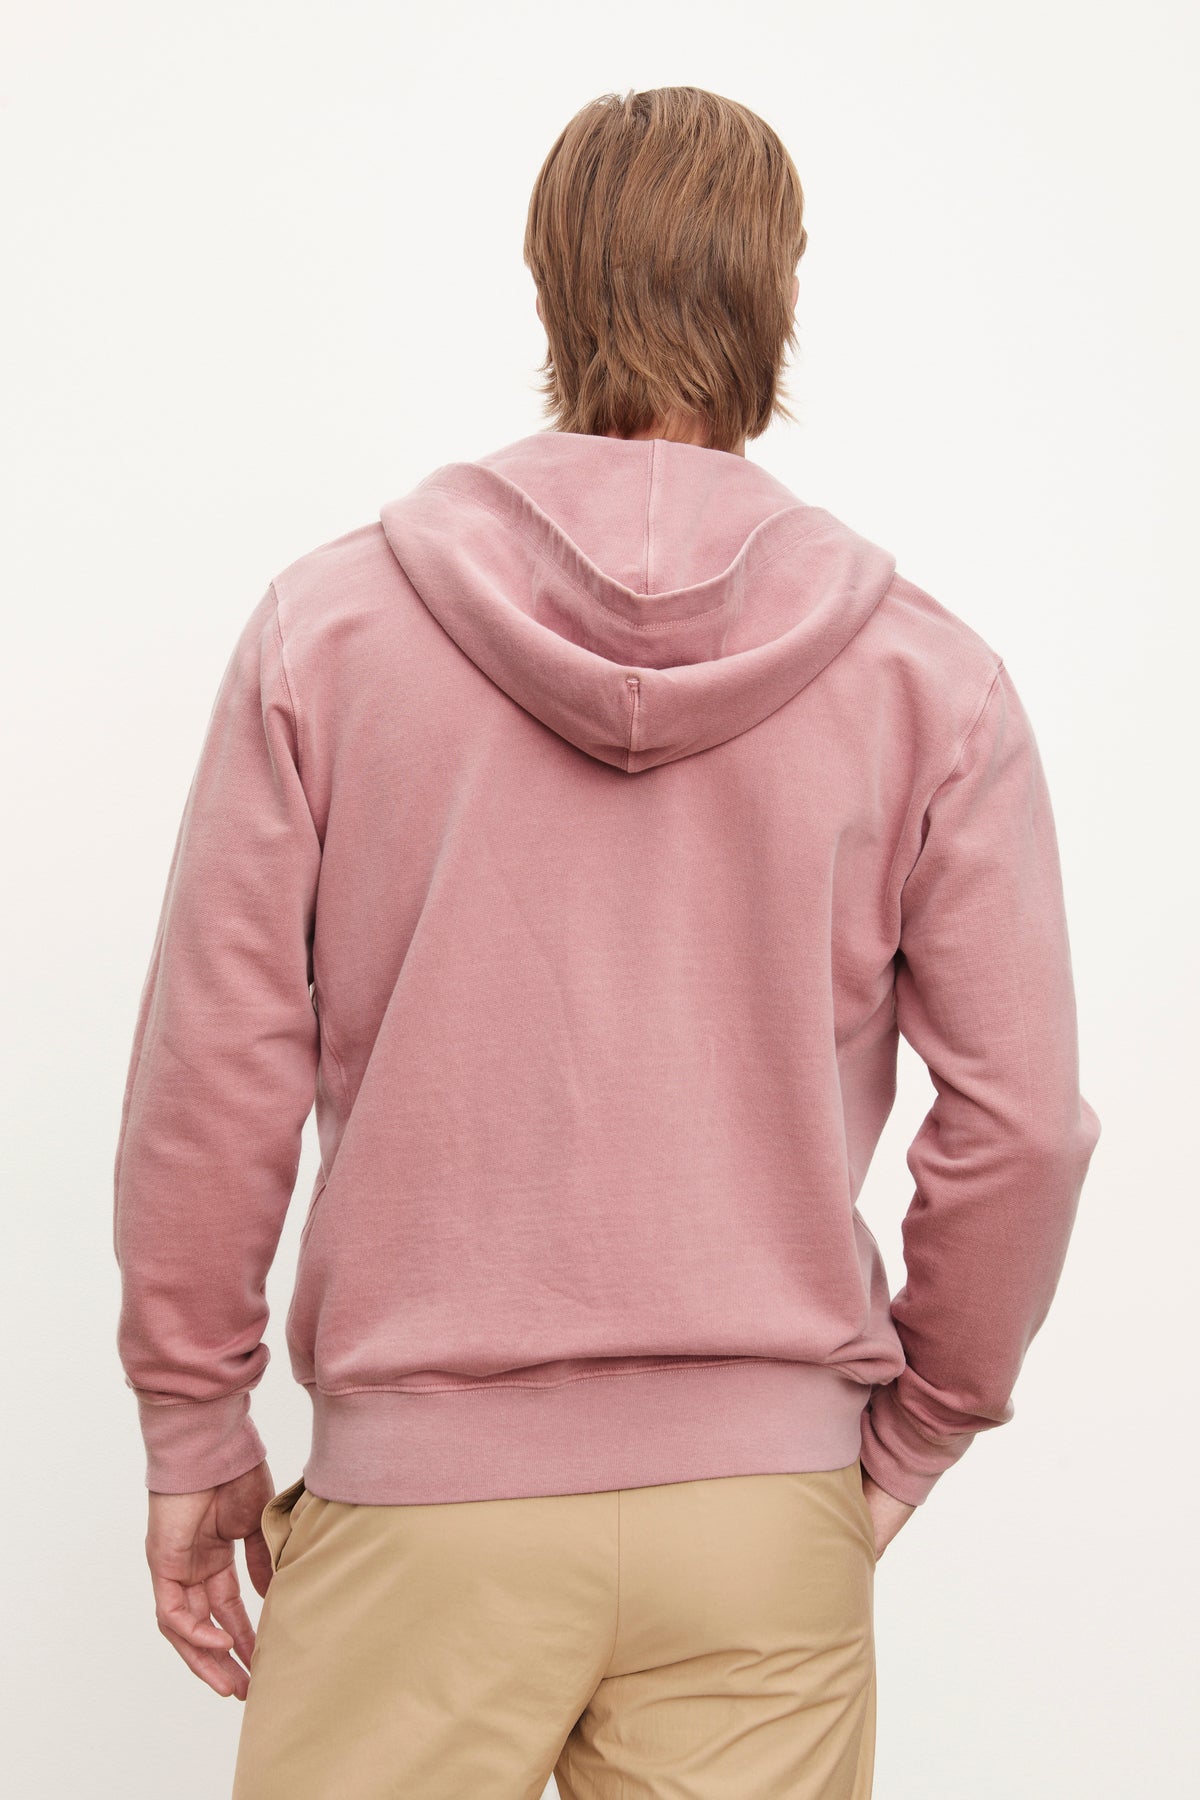 Man standing with his back to the camera, wearing a Velvet by Graham & Spencer VINCENT HOODIE and beige pants against a white background.-36732532588737